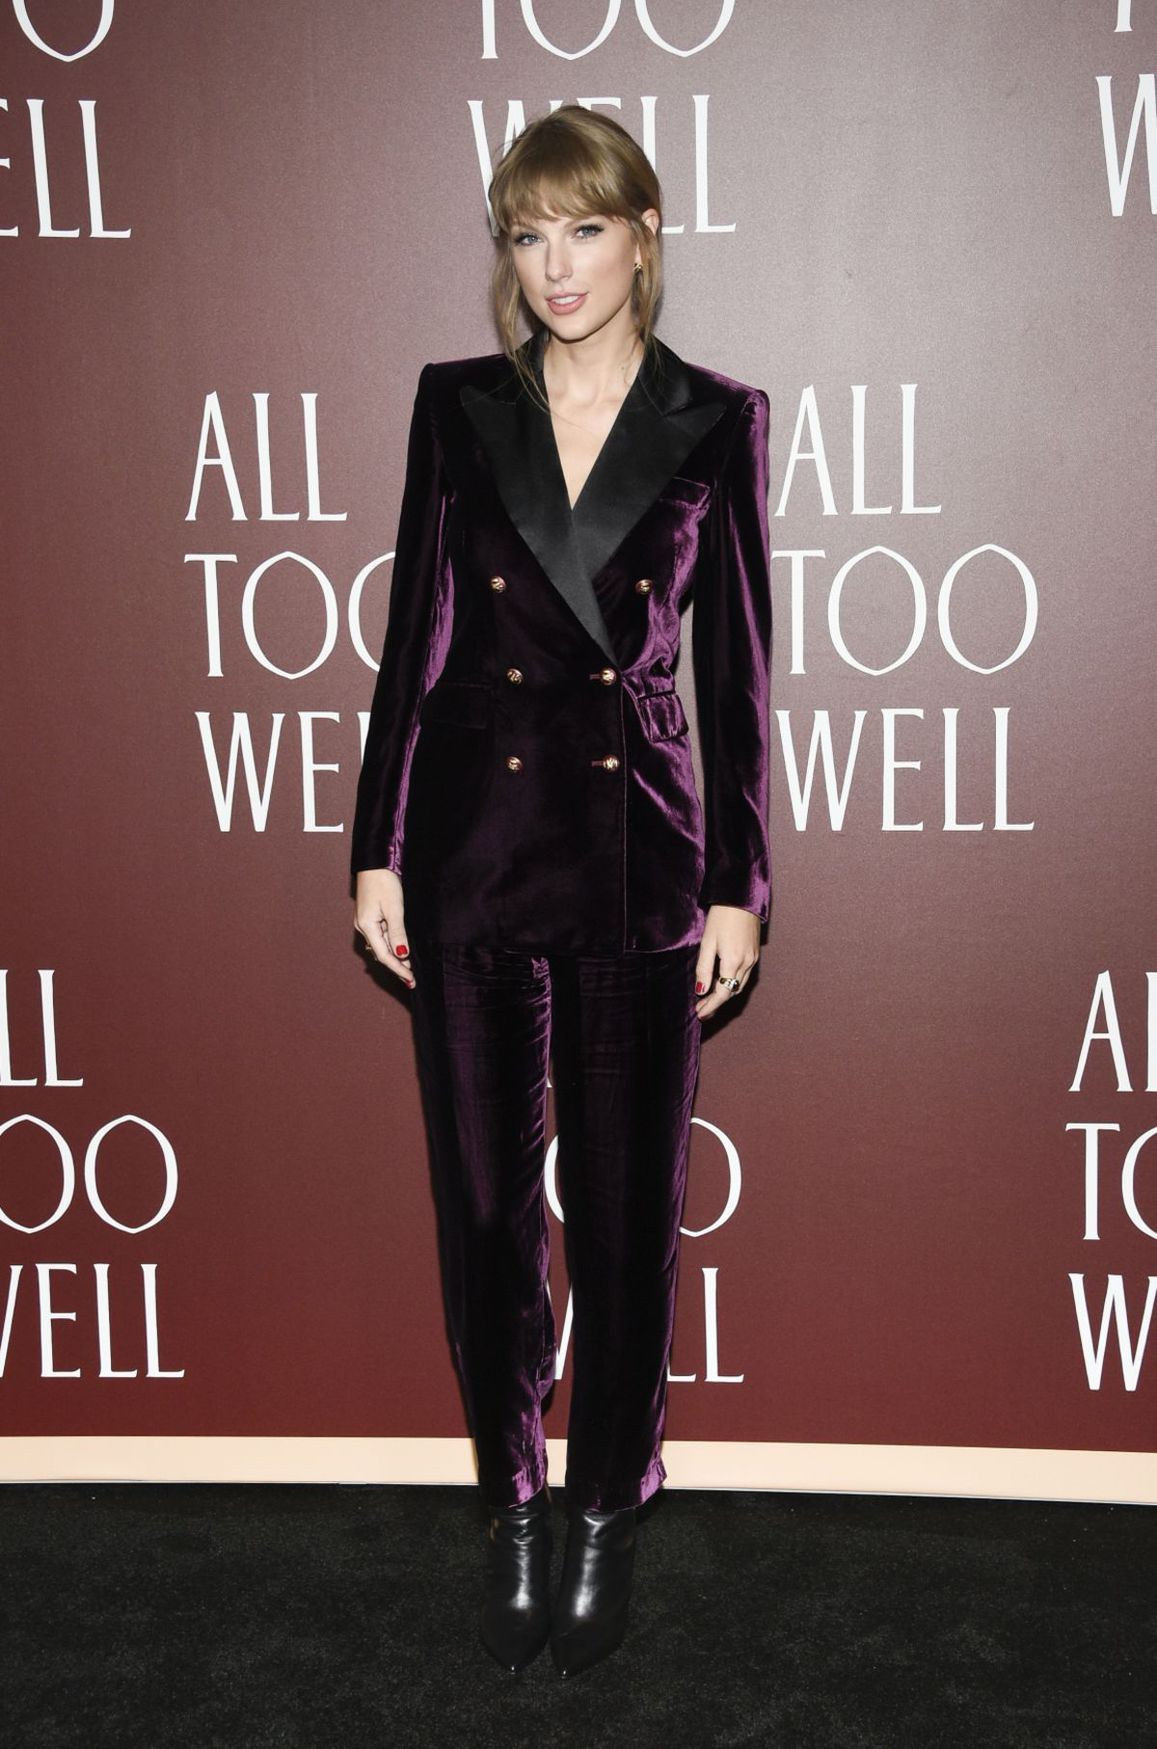 NY Premiere of "All Too Well"